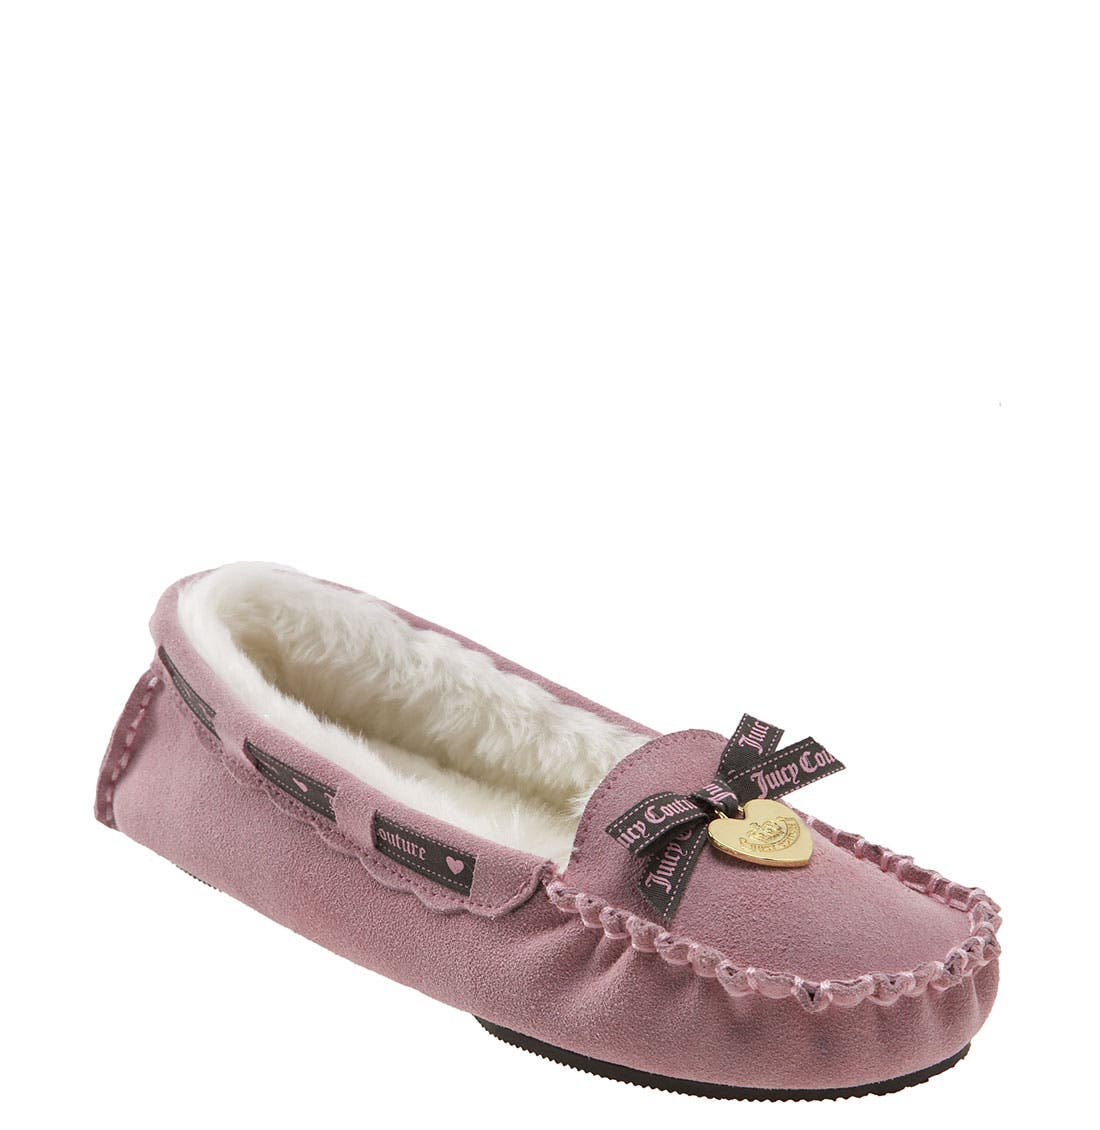 juicy couture slippers